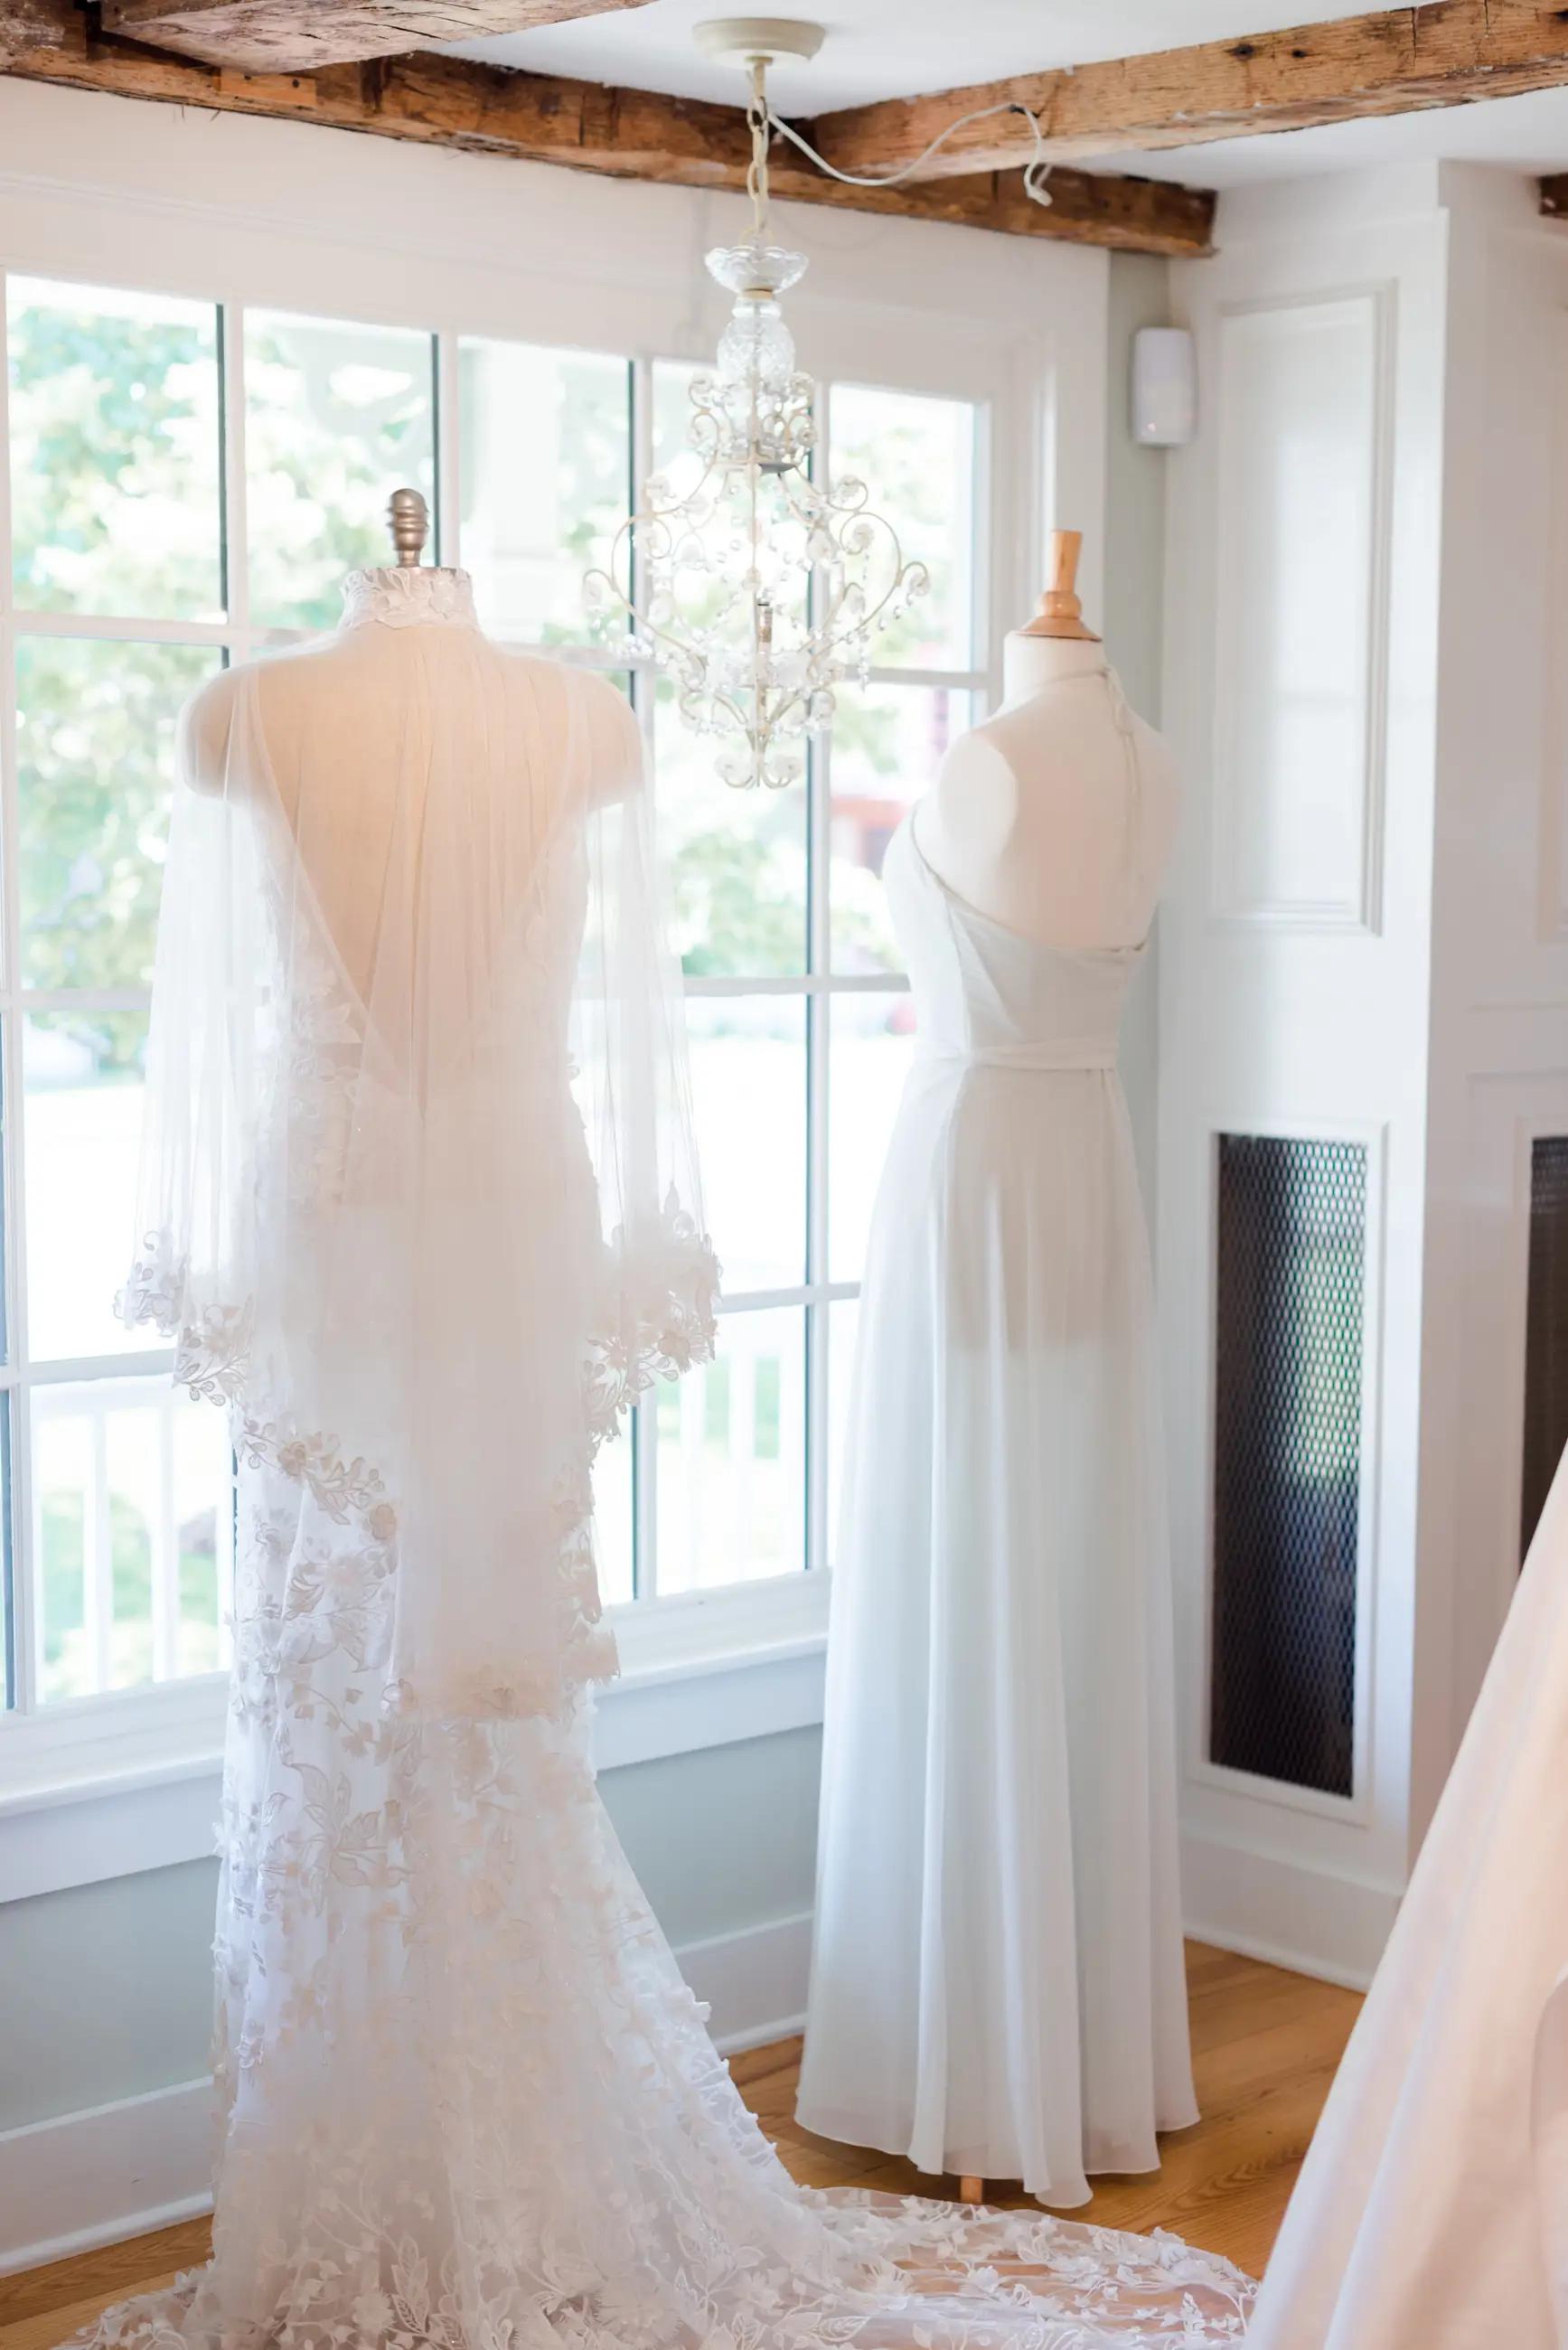 What Happens After Buying A Sample Sale Wedding Dress? Image